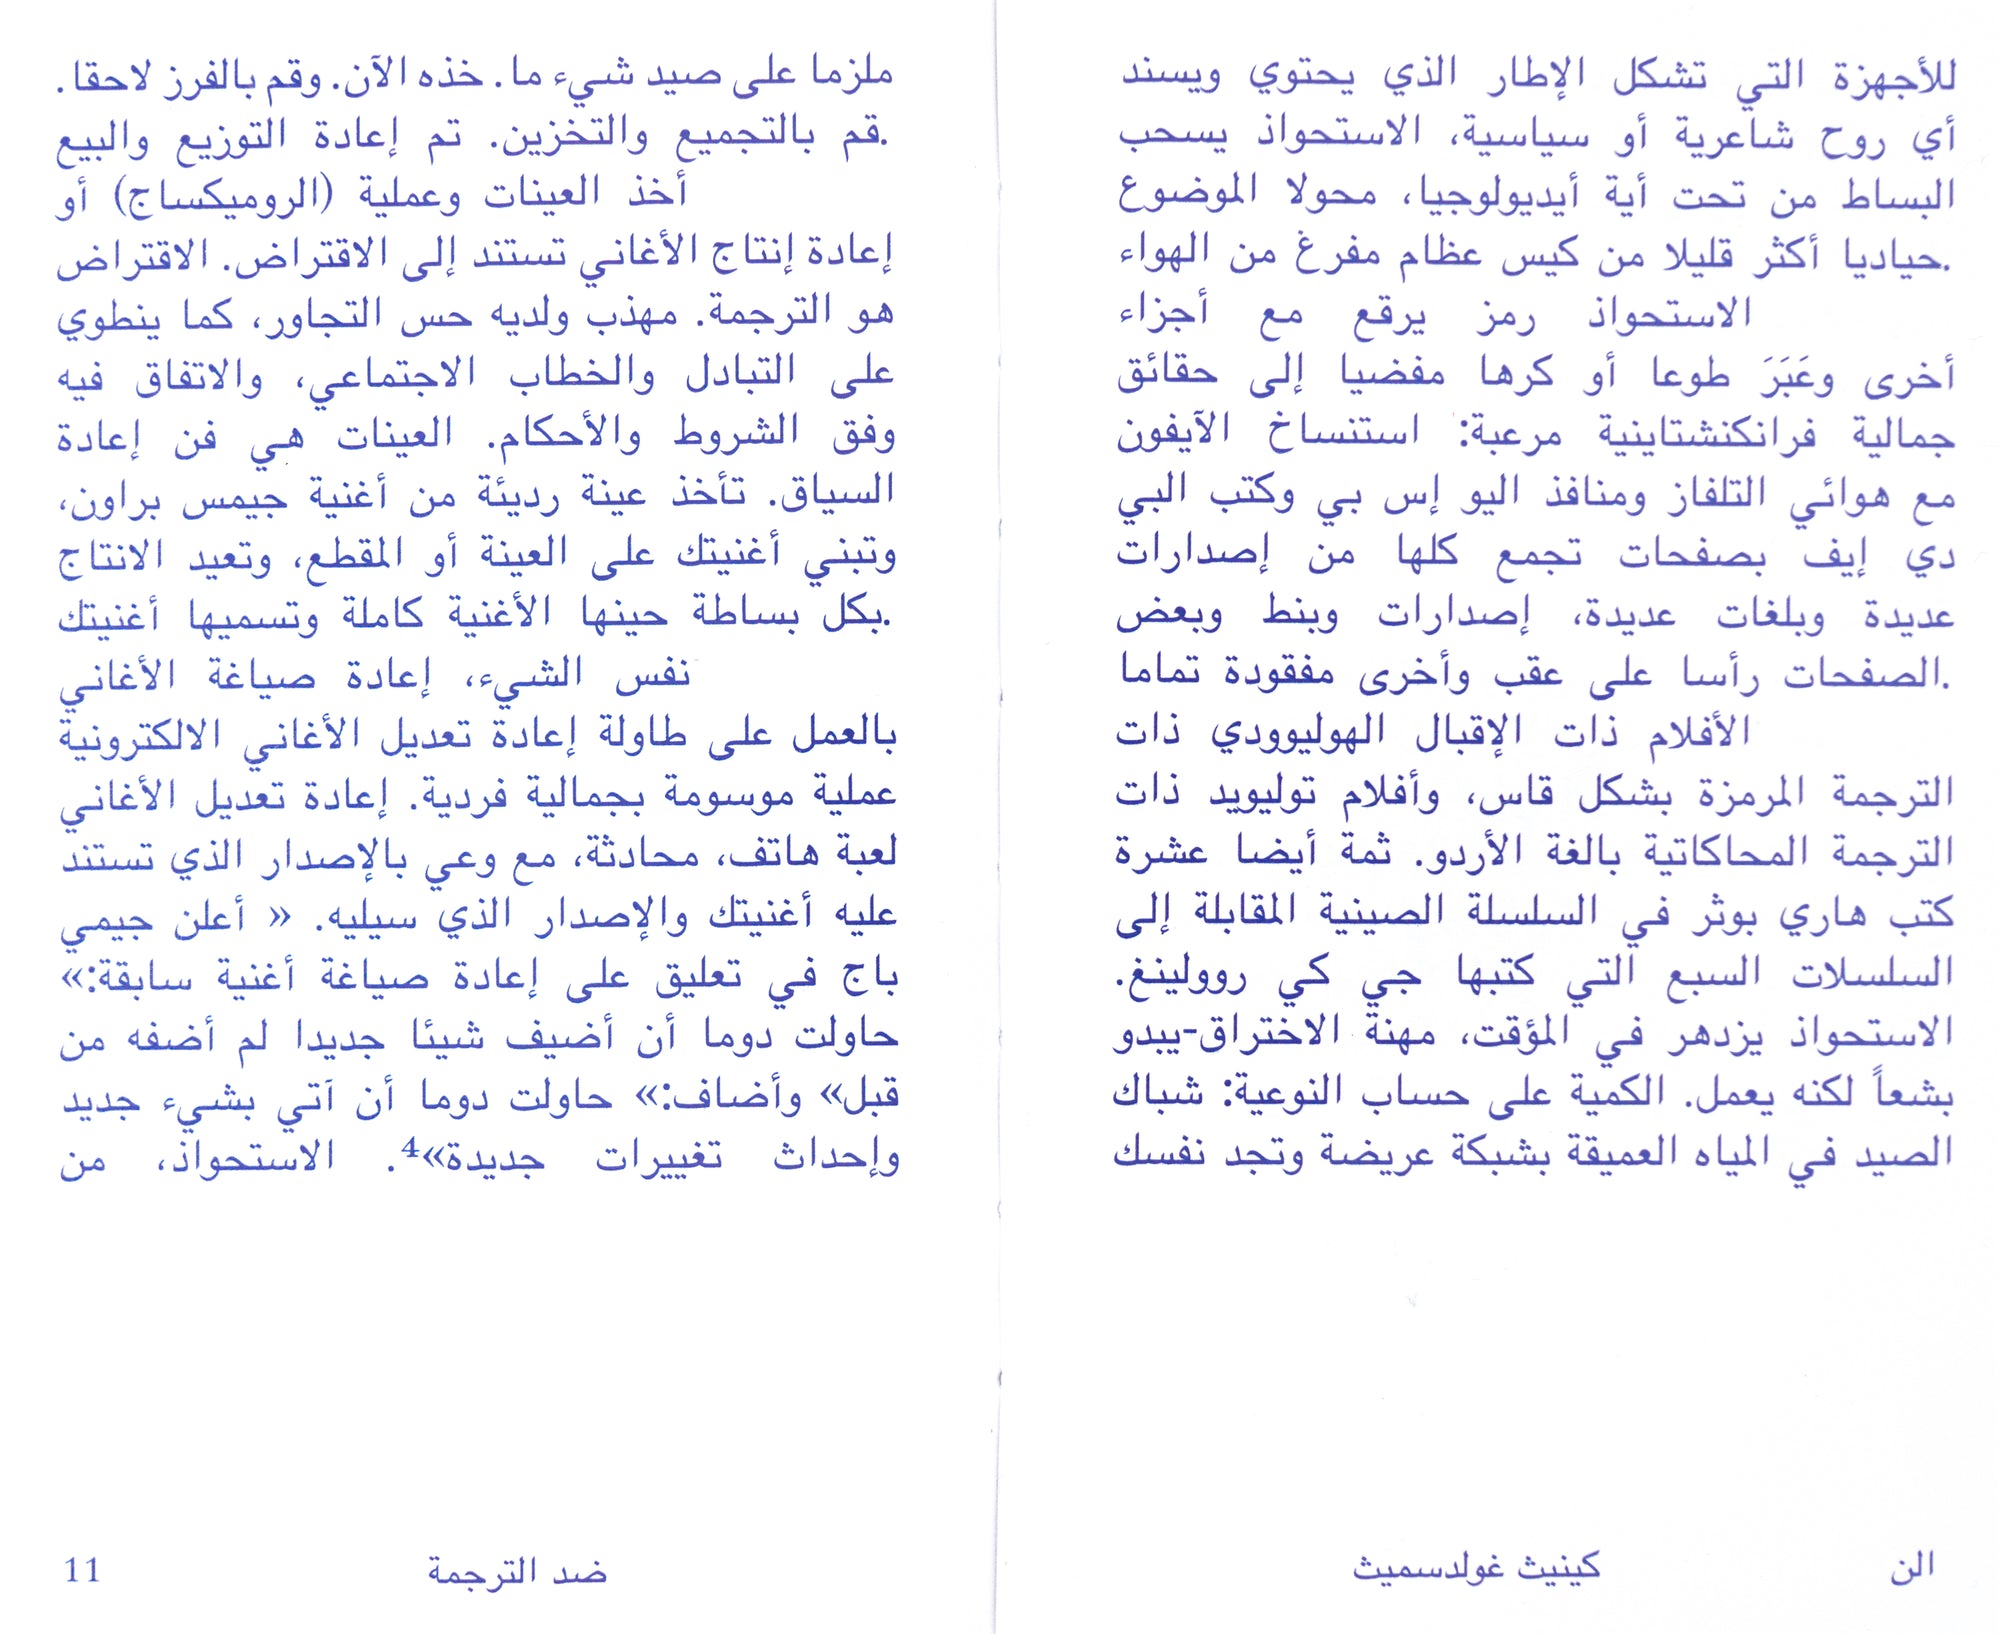 Spread of a book written in Arabic, in blue text on white paper.